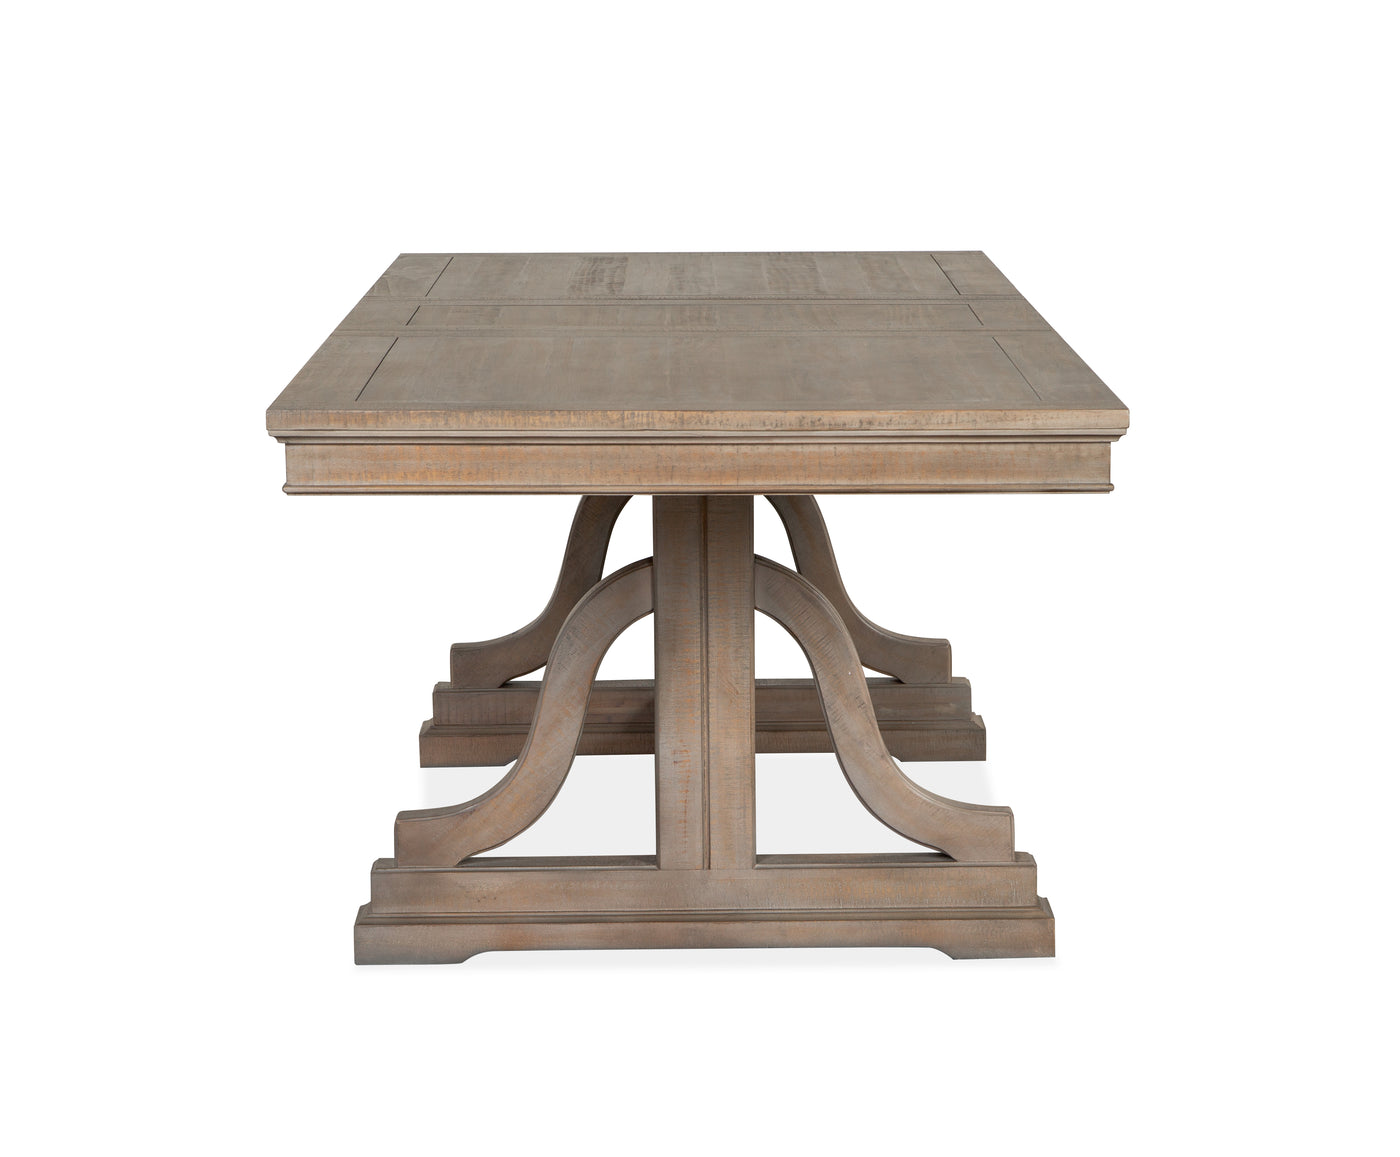 Paxton Place Extendable Dining Table - Greyish Brown